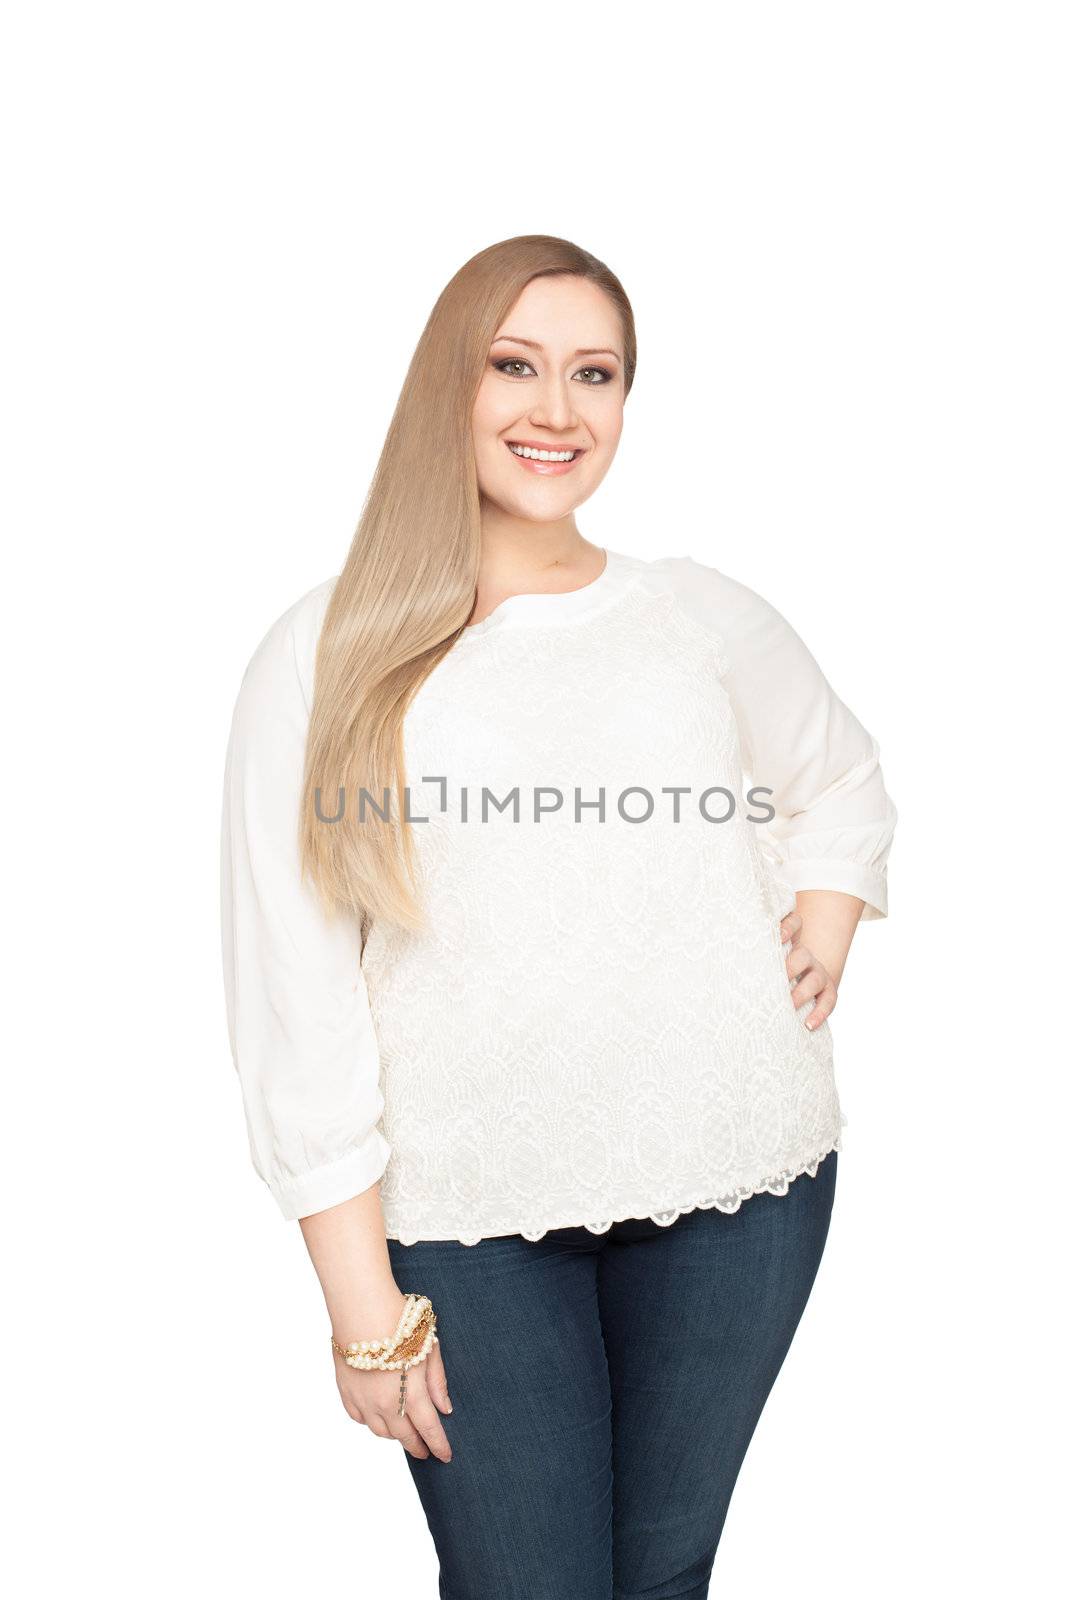 Blonde xxl woman standing on white backround, smiling at camera